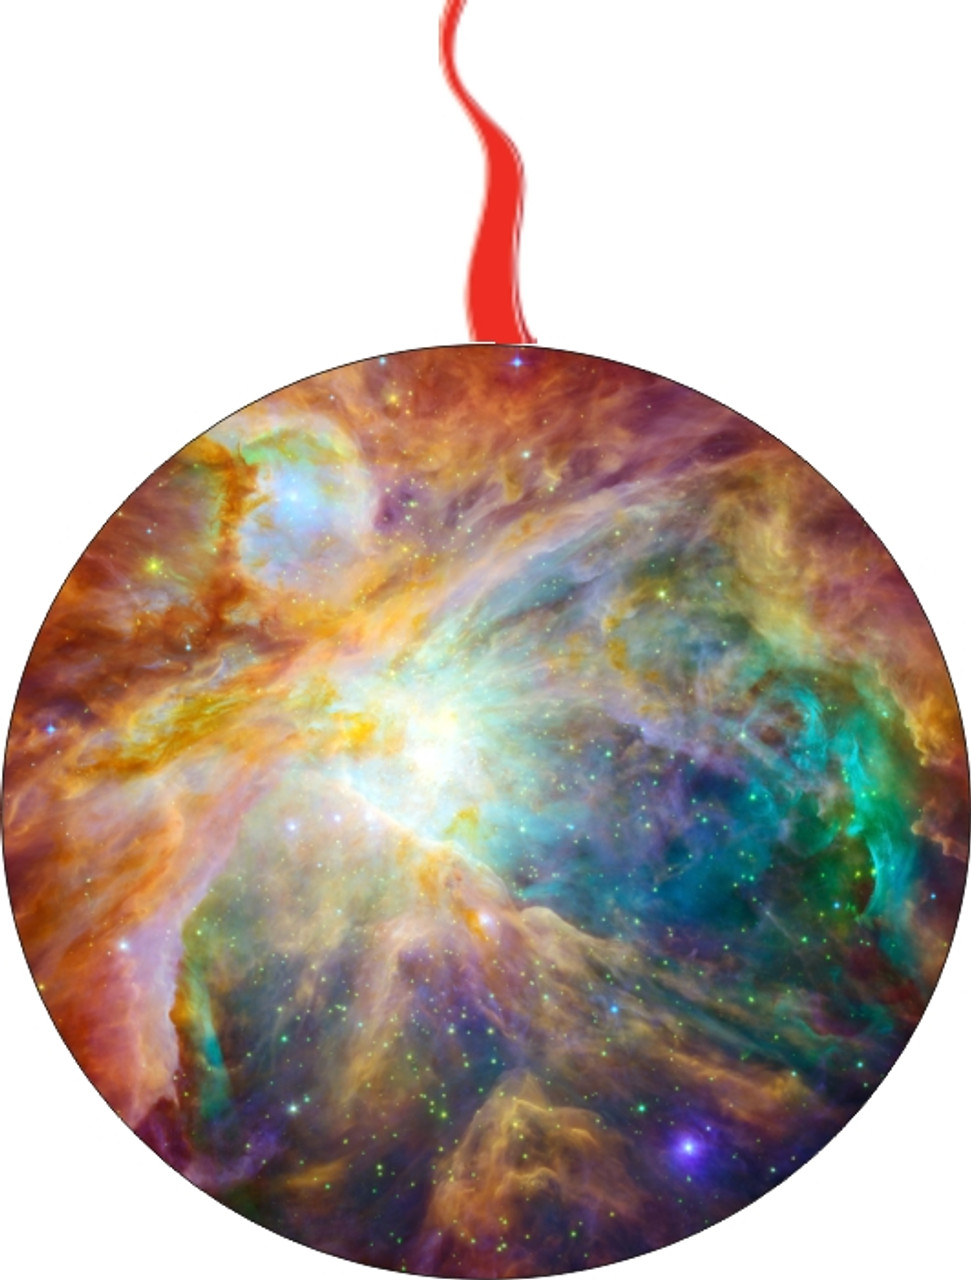 Hubble Telescope The Cosmic Cloud Orion Nebula - 1,500 Light-Years Away From Earth Christmas Ornament